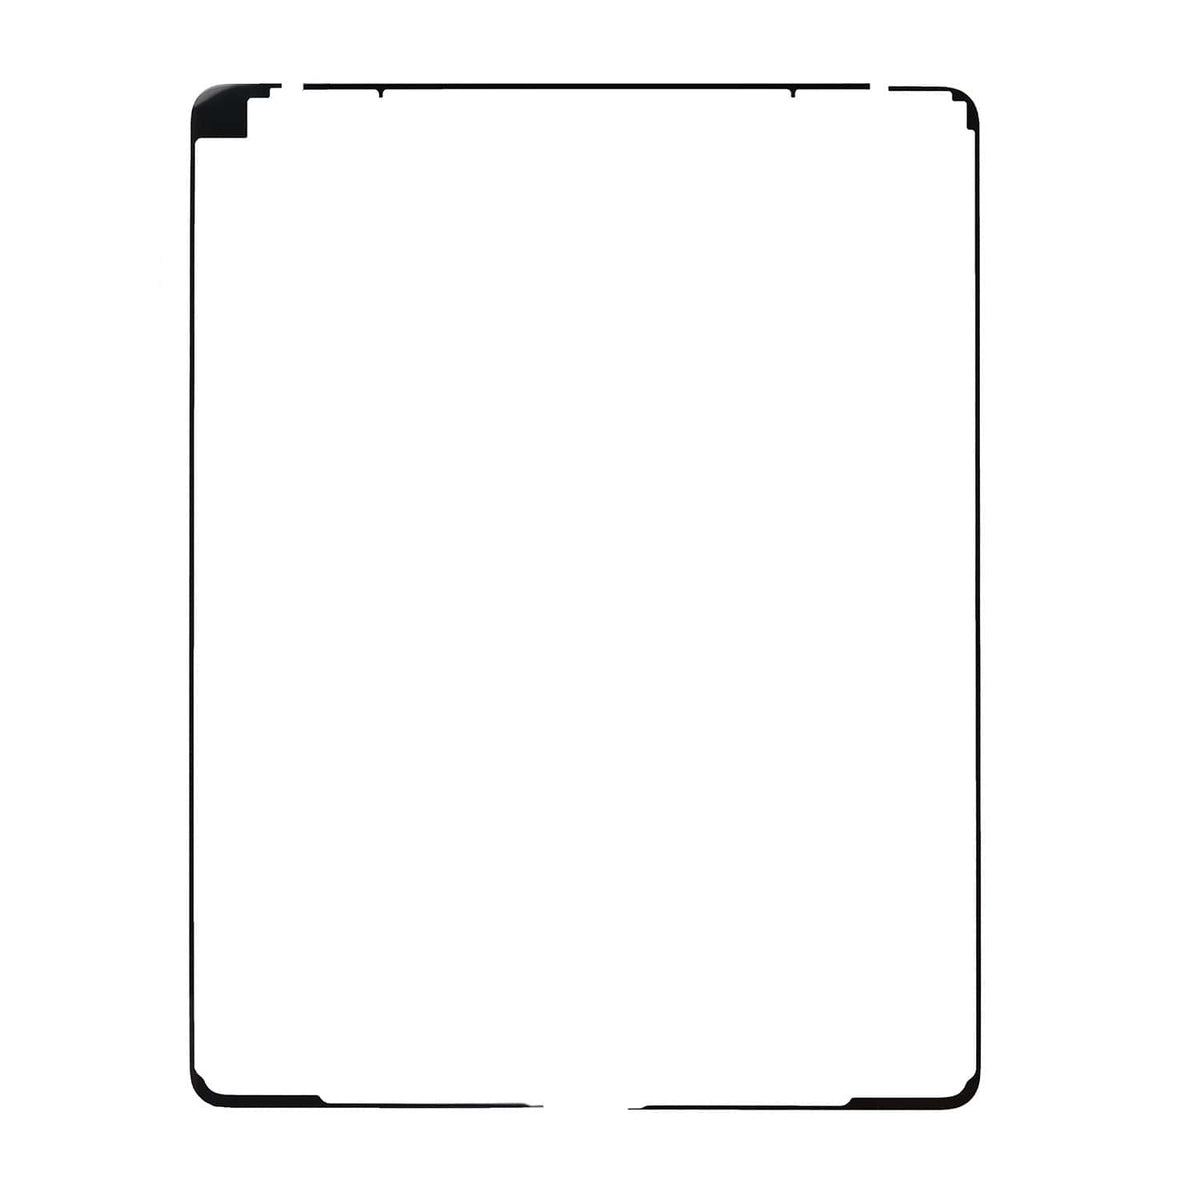 TOUCH SCREEN ADHESIVE STRIPS FOR IPAD AIR 3/ PRO 10.5" 1ST GEN